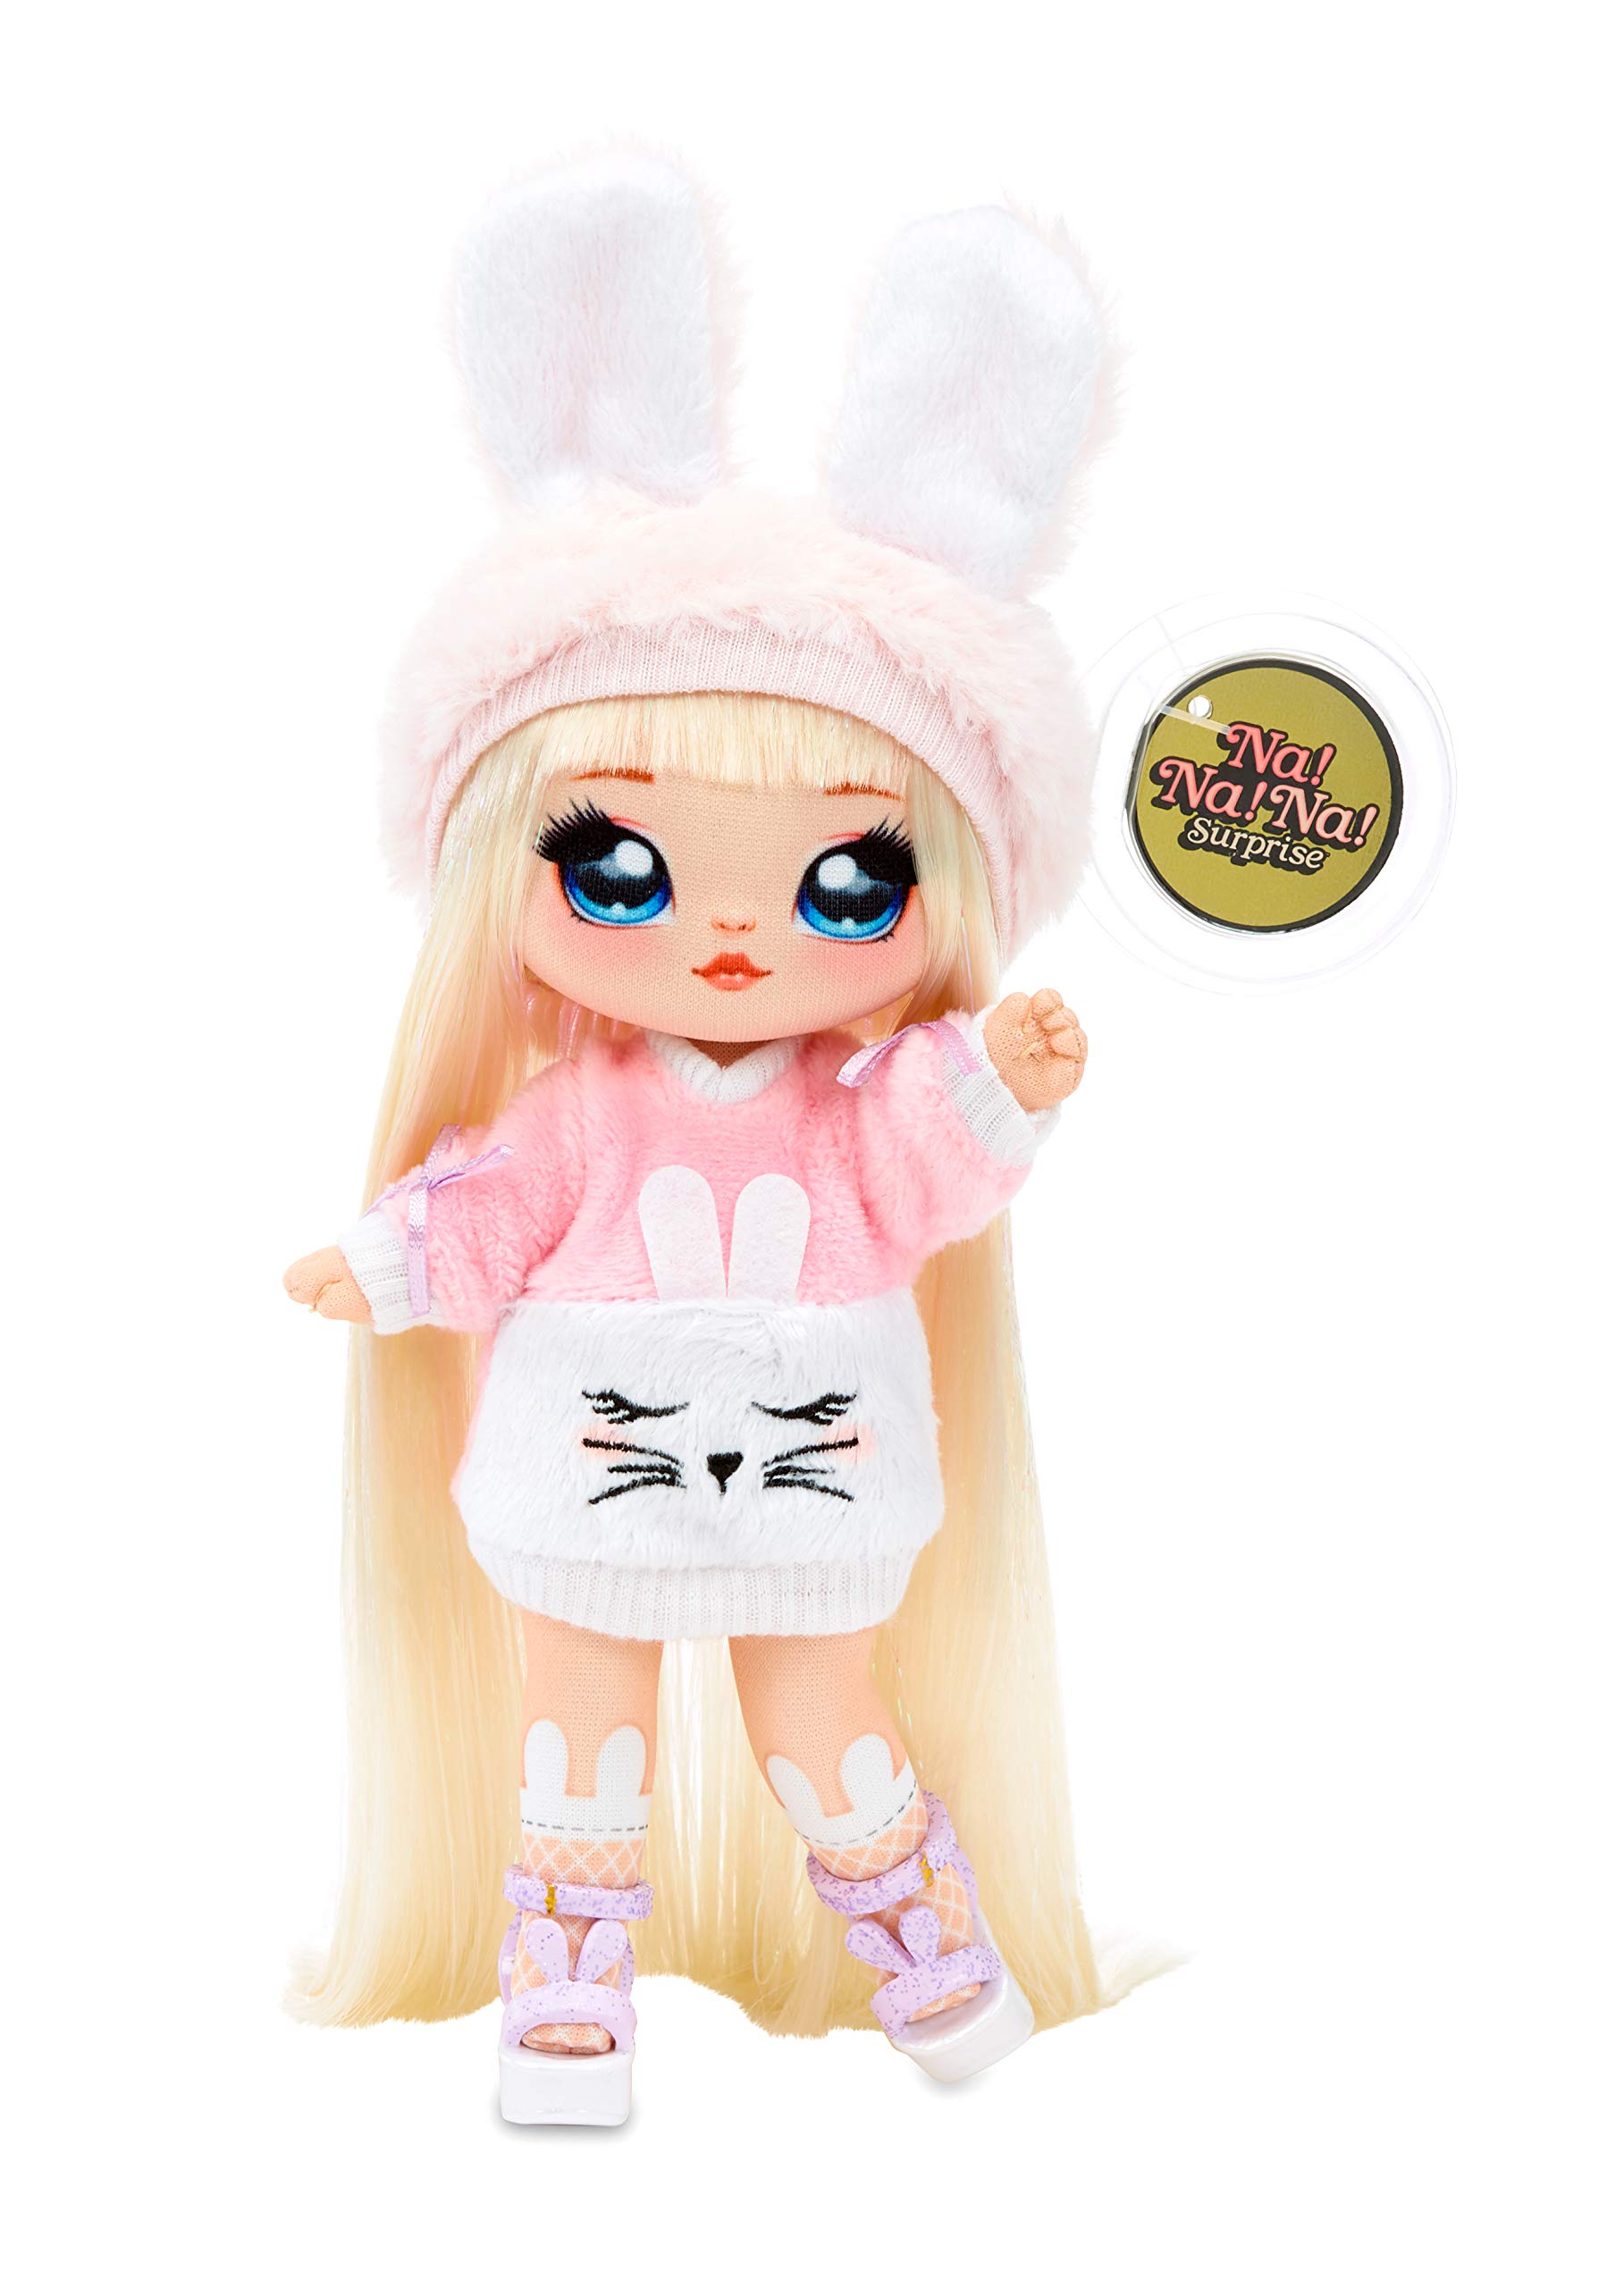 Na Na Na Surprise 3-in-1 Backpack Bedroom Playset With Limited Edition Aubrey Heart Doll In Exclusive Outfit | Pink Fuzzy Bunny Bag, Real Mirror, Closet with Drawer, Pillows, Blanket | Kids Ages 5+